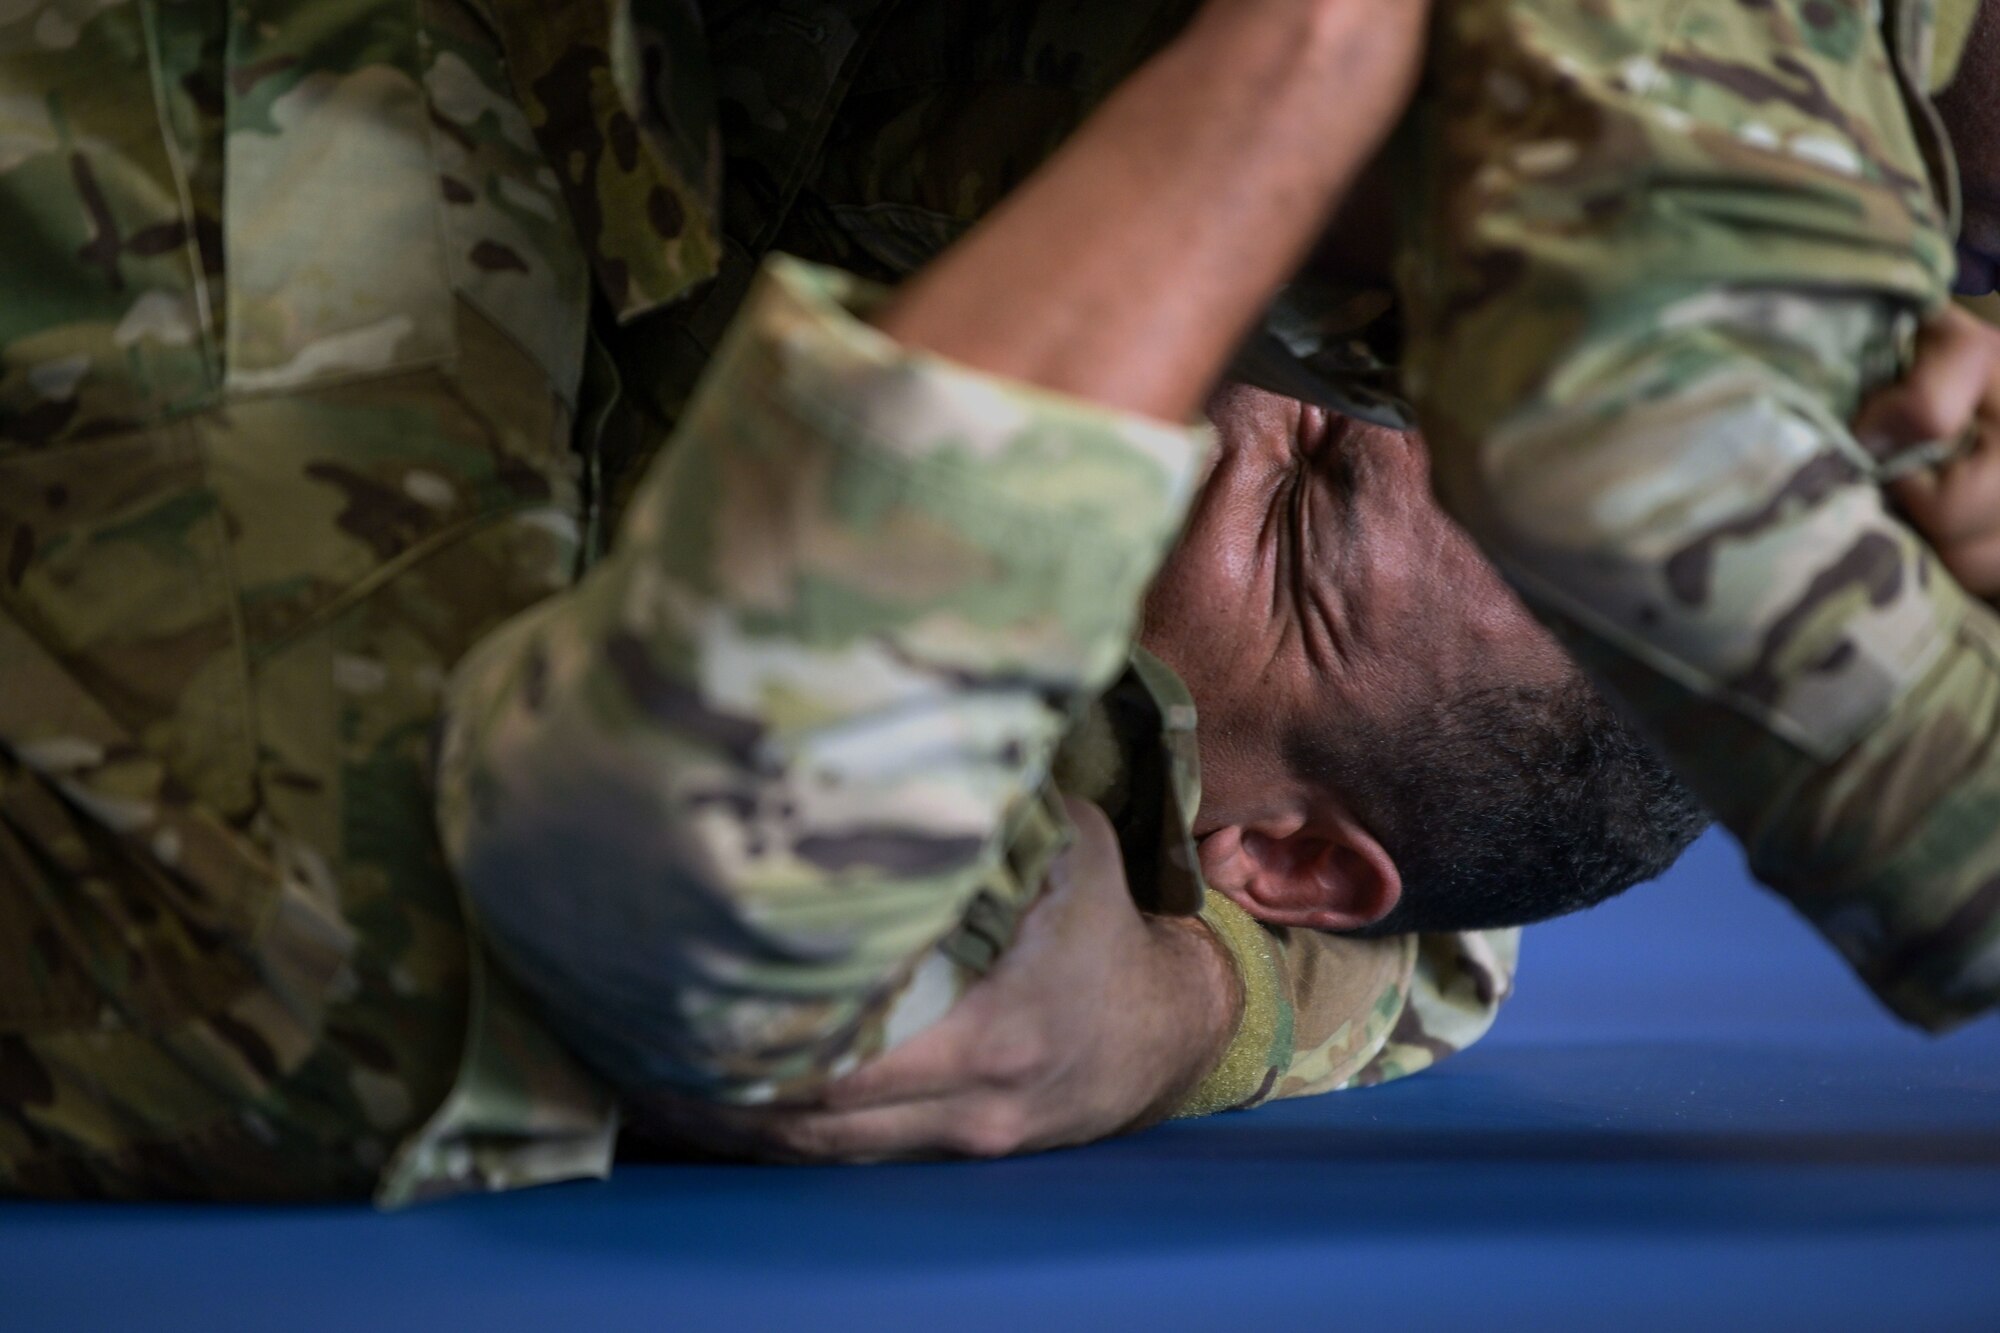 U.S. Air Force Staff Sgt. Irvin Morales, a Security Forces craftsman, with the 156th Security Forces Squadron, is held down in the front mount non dominant position during a live role exercise, March 17, 2022 at Muñiz Air National Guard Base, Puerto Rico. The 40 hour Air Force Combatives Program allowed the 22 Airmen that participated, to experience close quarters hand to hand combat and train in various scenarios against an opponent. (U.S. Air National Guard photo by Master Sgt. Rafael D. Rosa)